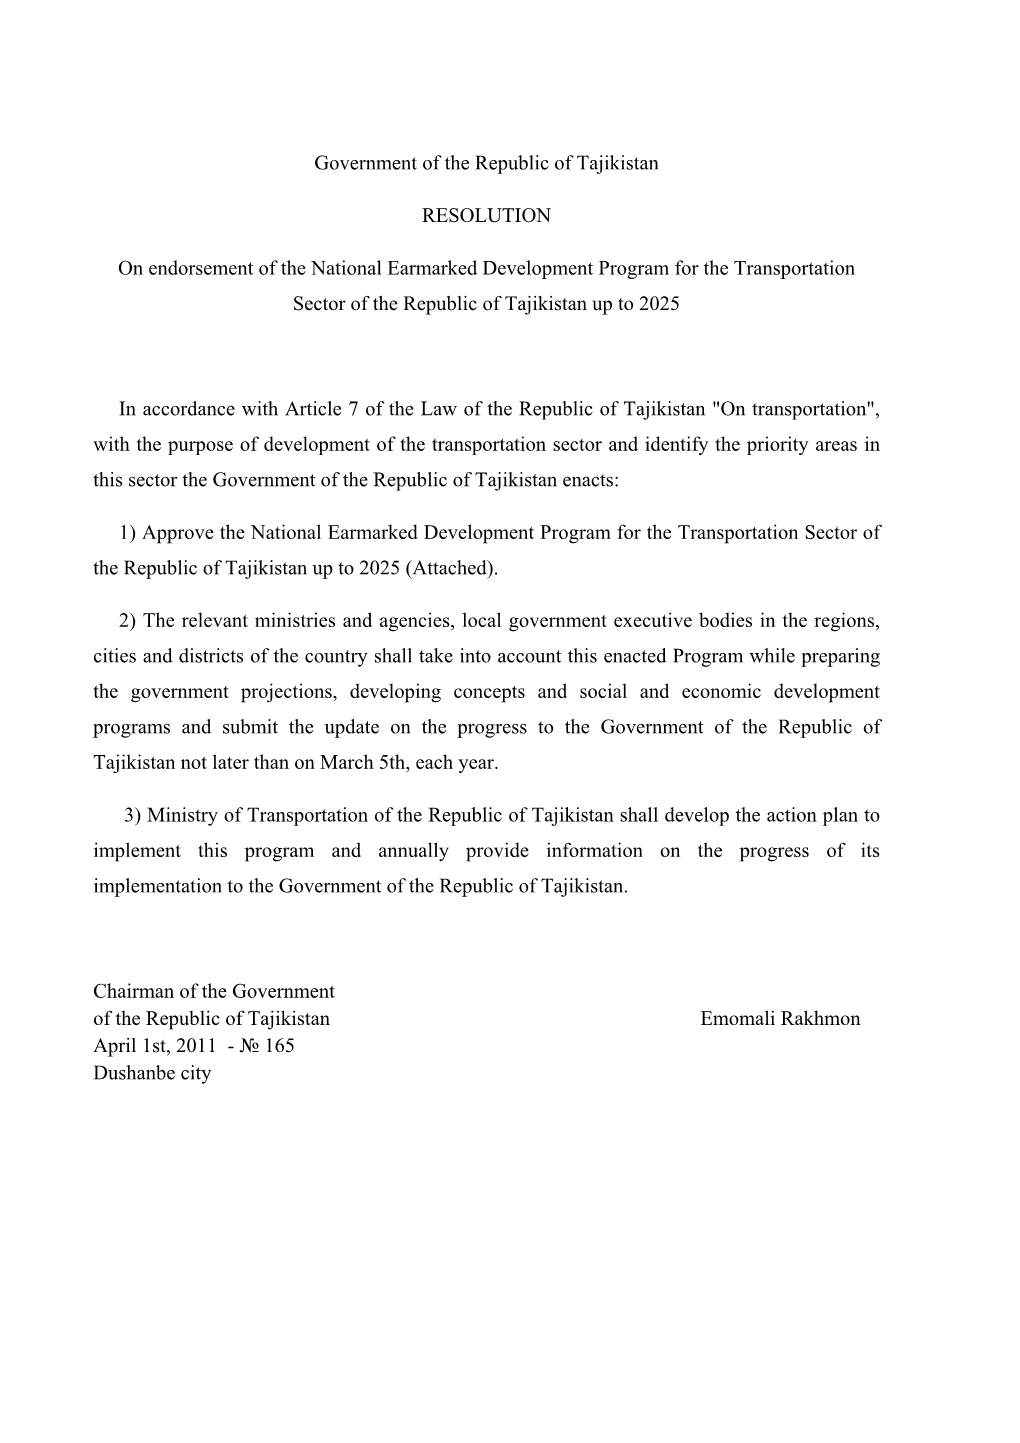 Government of the Republic of Tajikistan RESOLUTION On